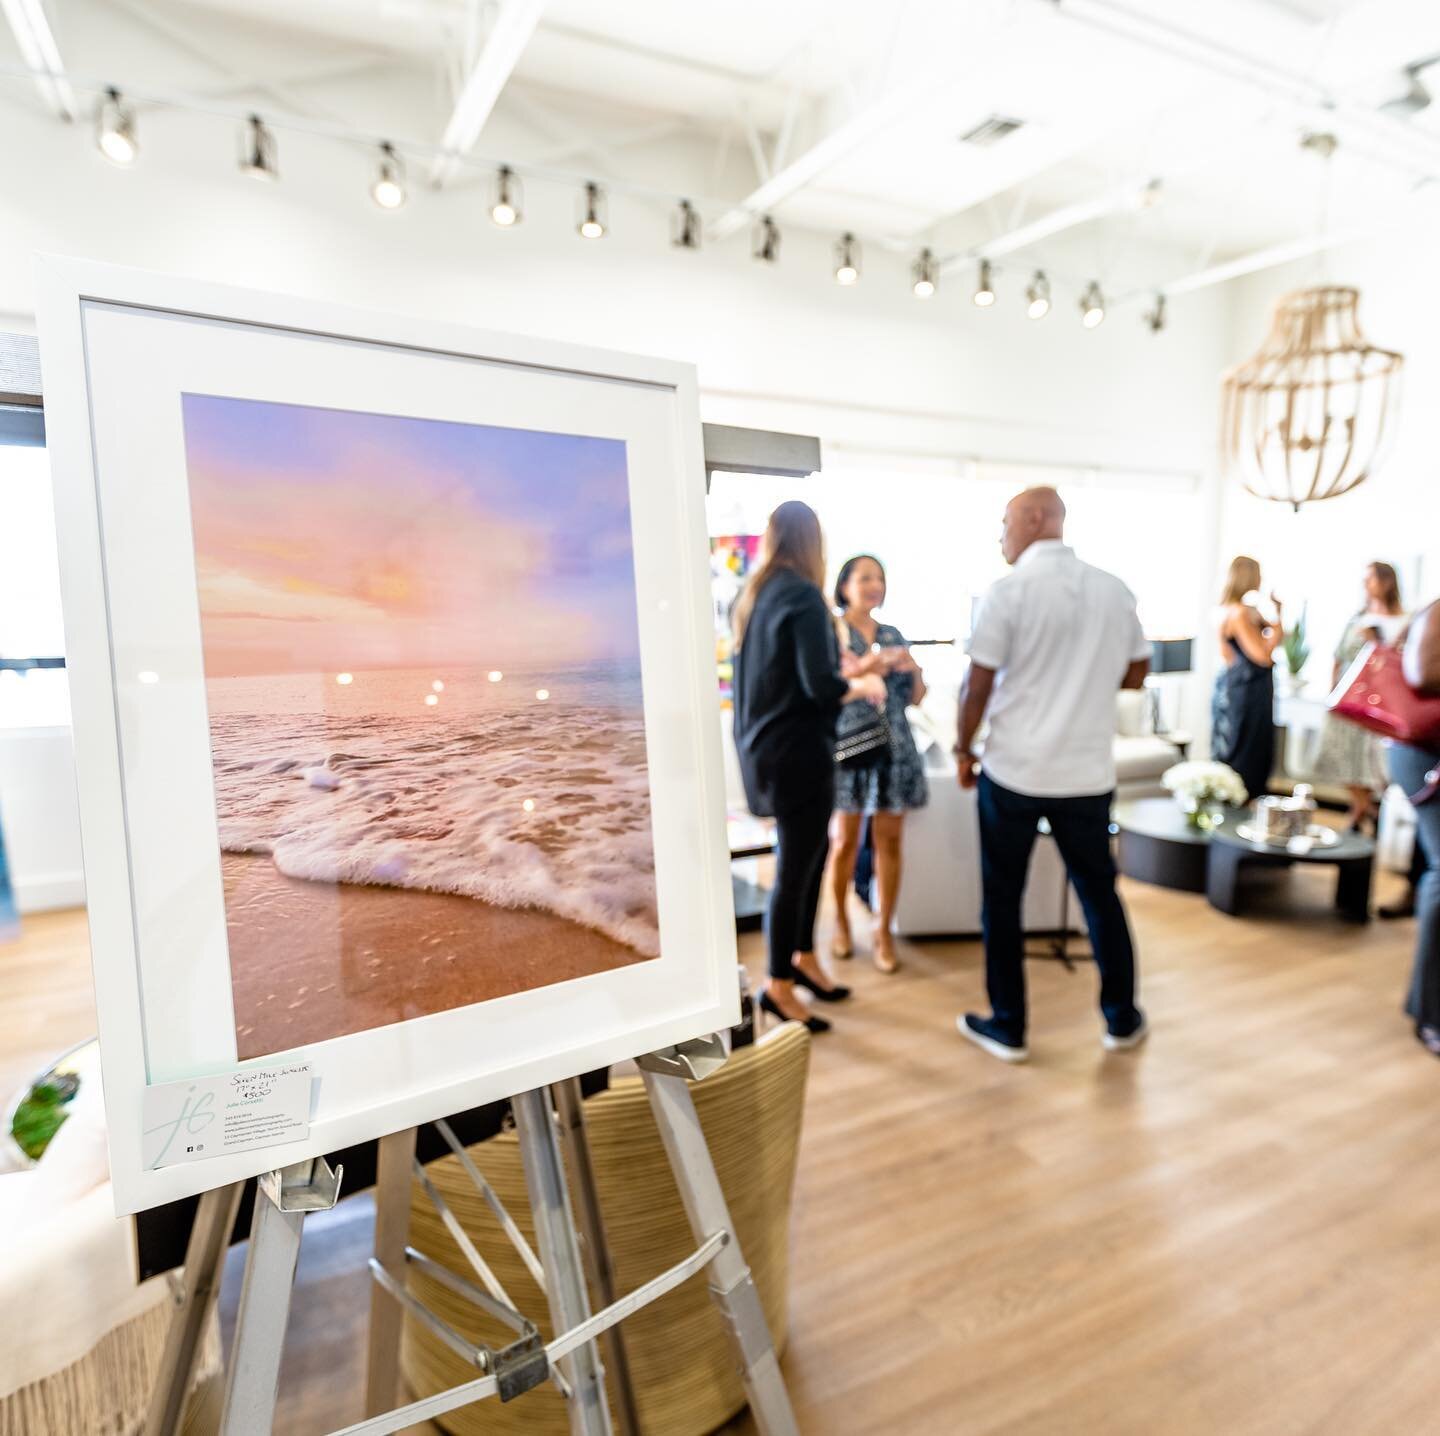 Those who joined the IDG Interiors pop-up event during CAW2021 will know it was a highlight of the CAW West tour! IDG, which is based in Seven Mile Shops, is a keen supporter of the local art community, hosting monthly art events. For CAW2022, the de